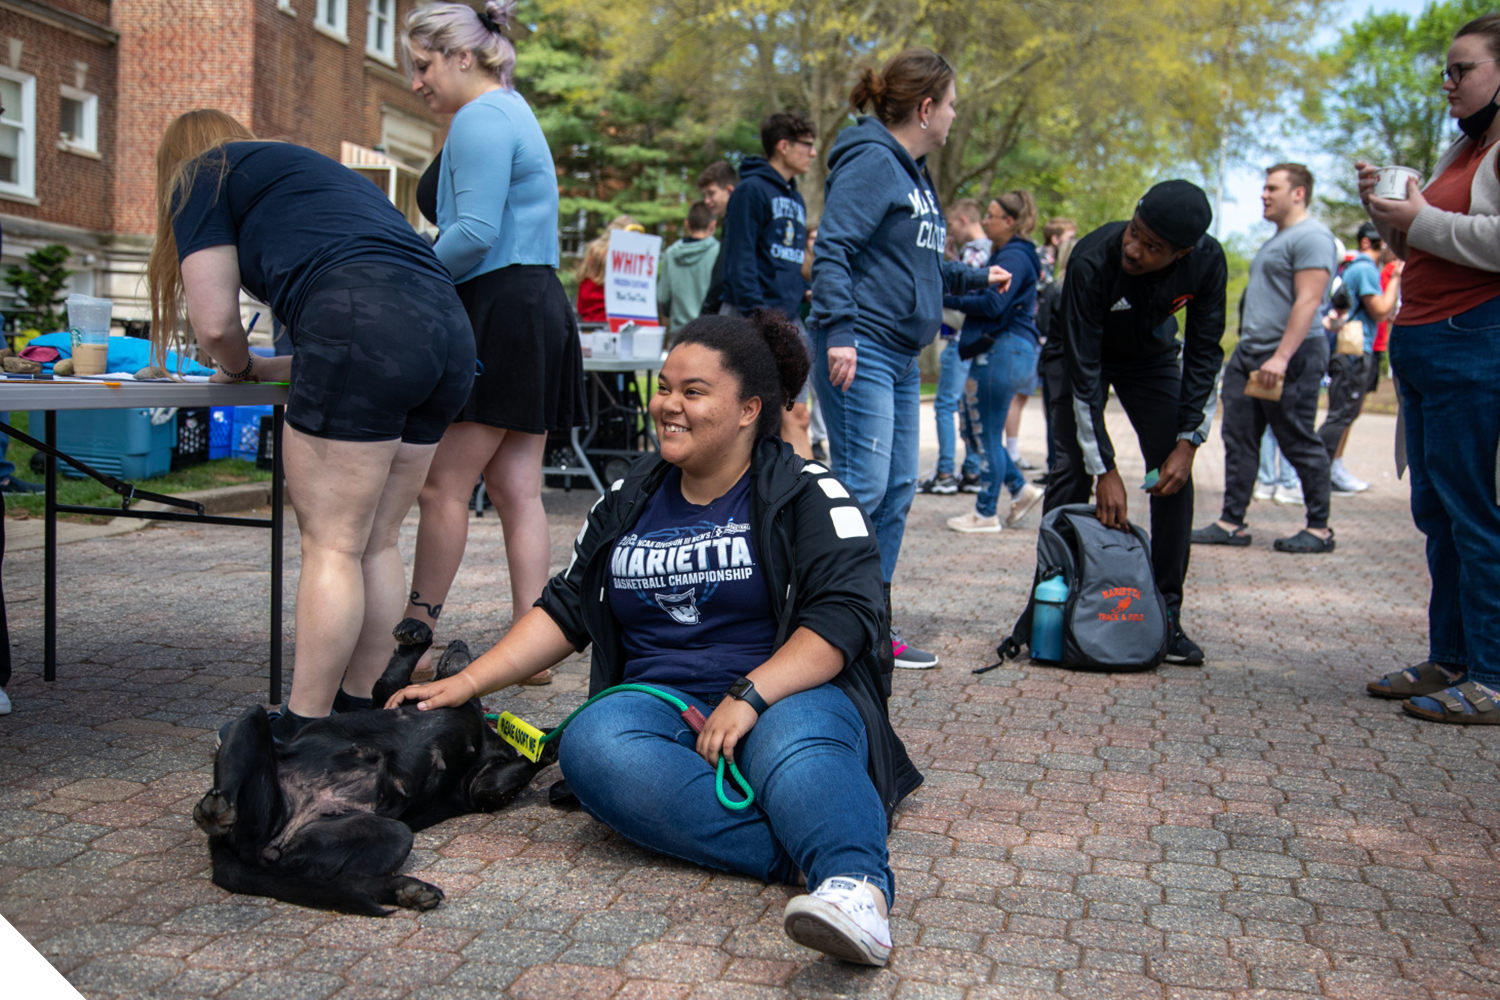 A Marietta College student smiles while petting a dog during a Feel Good Friday event